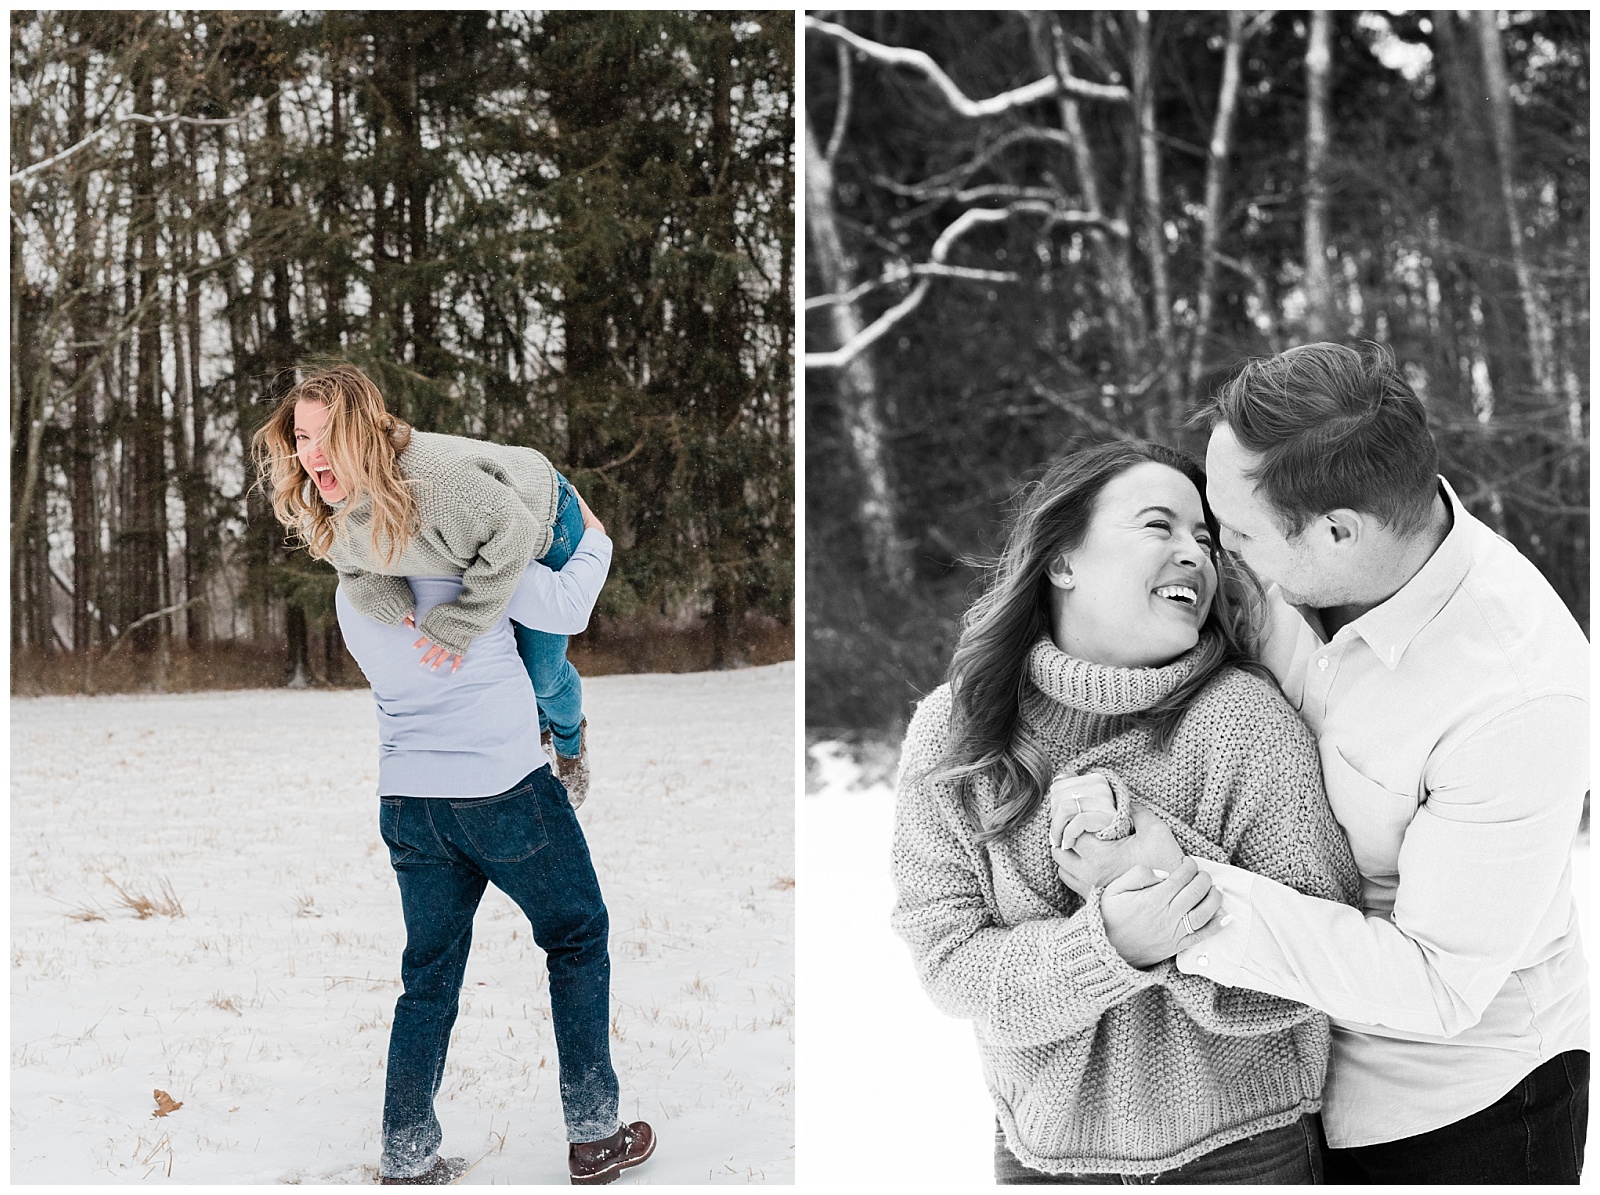 New Jersey Engagement Session, Snowy, Winter, Cozy, Session, Wedding Photographer, Cross Estate Gardens, Snow, Wintry, Light and Airy, Lift